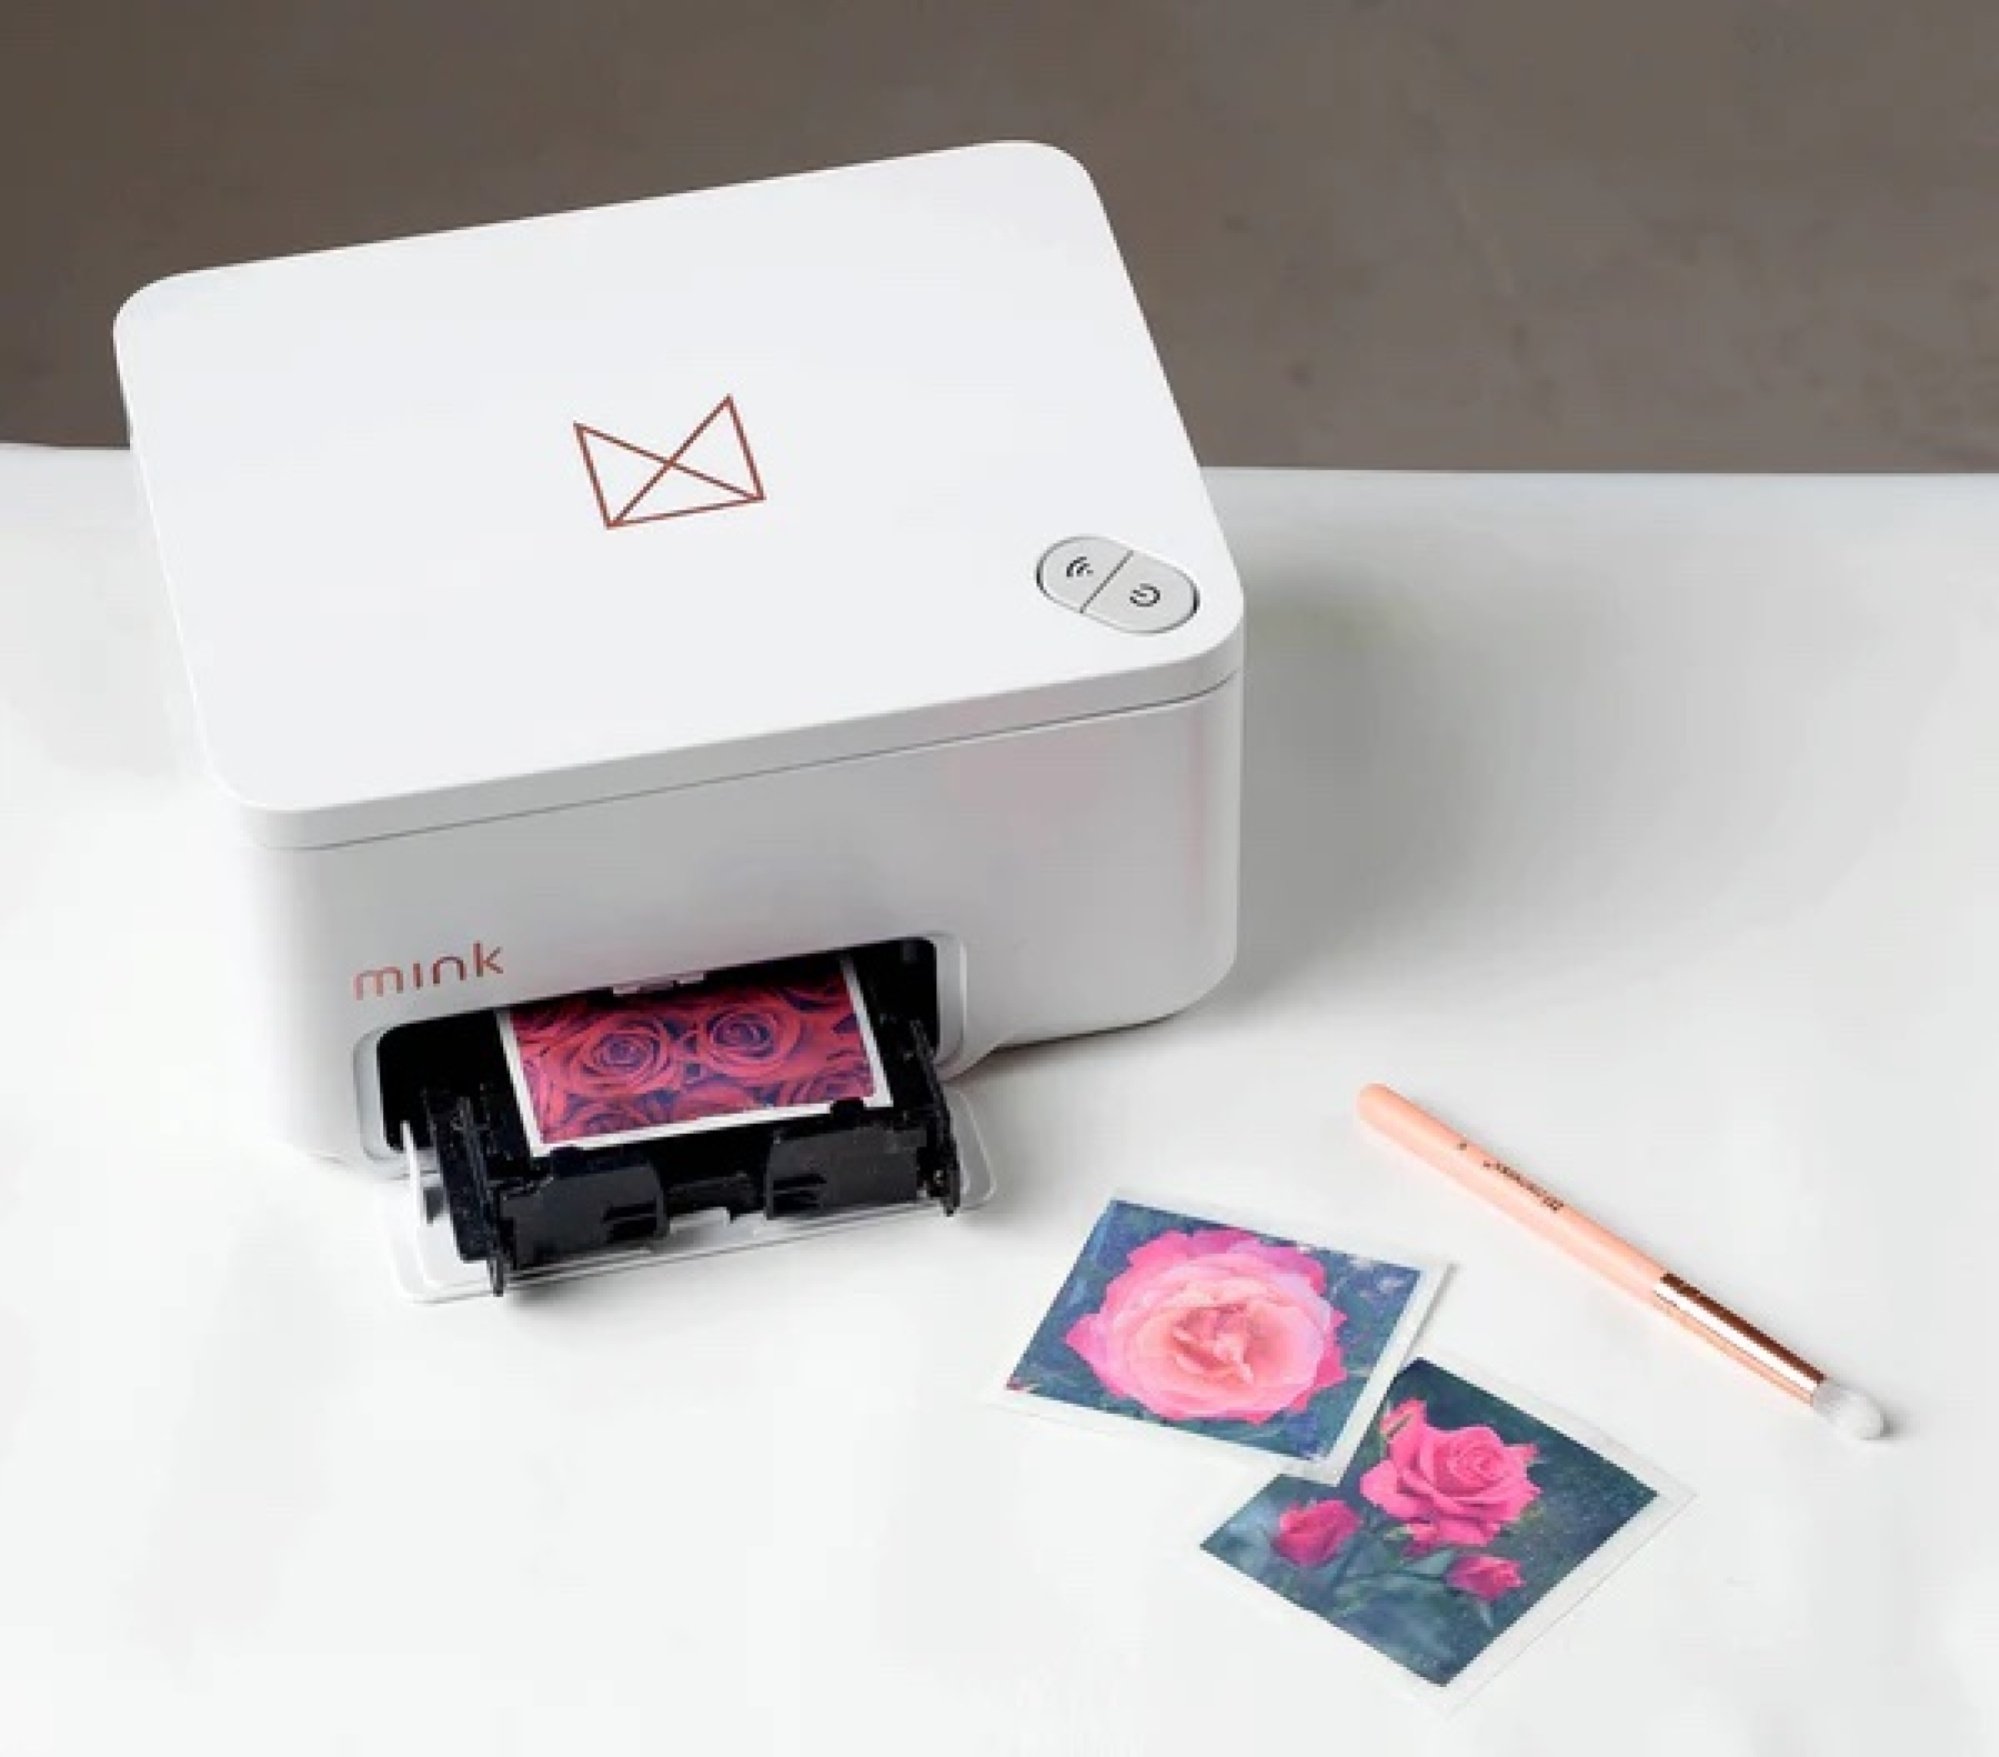 Small white printer on table top in the middle of printing out a square image of a pink flower. There is a makeup brush next to the printer.